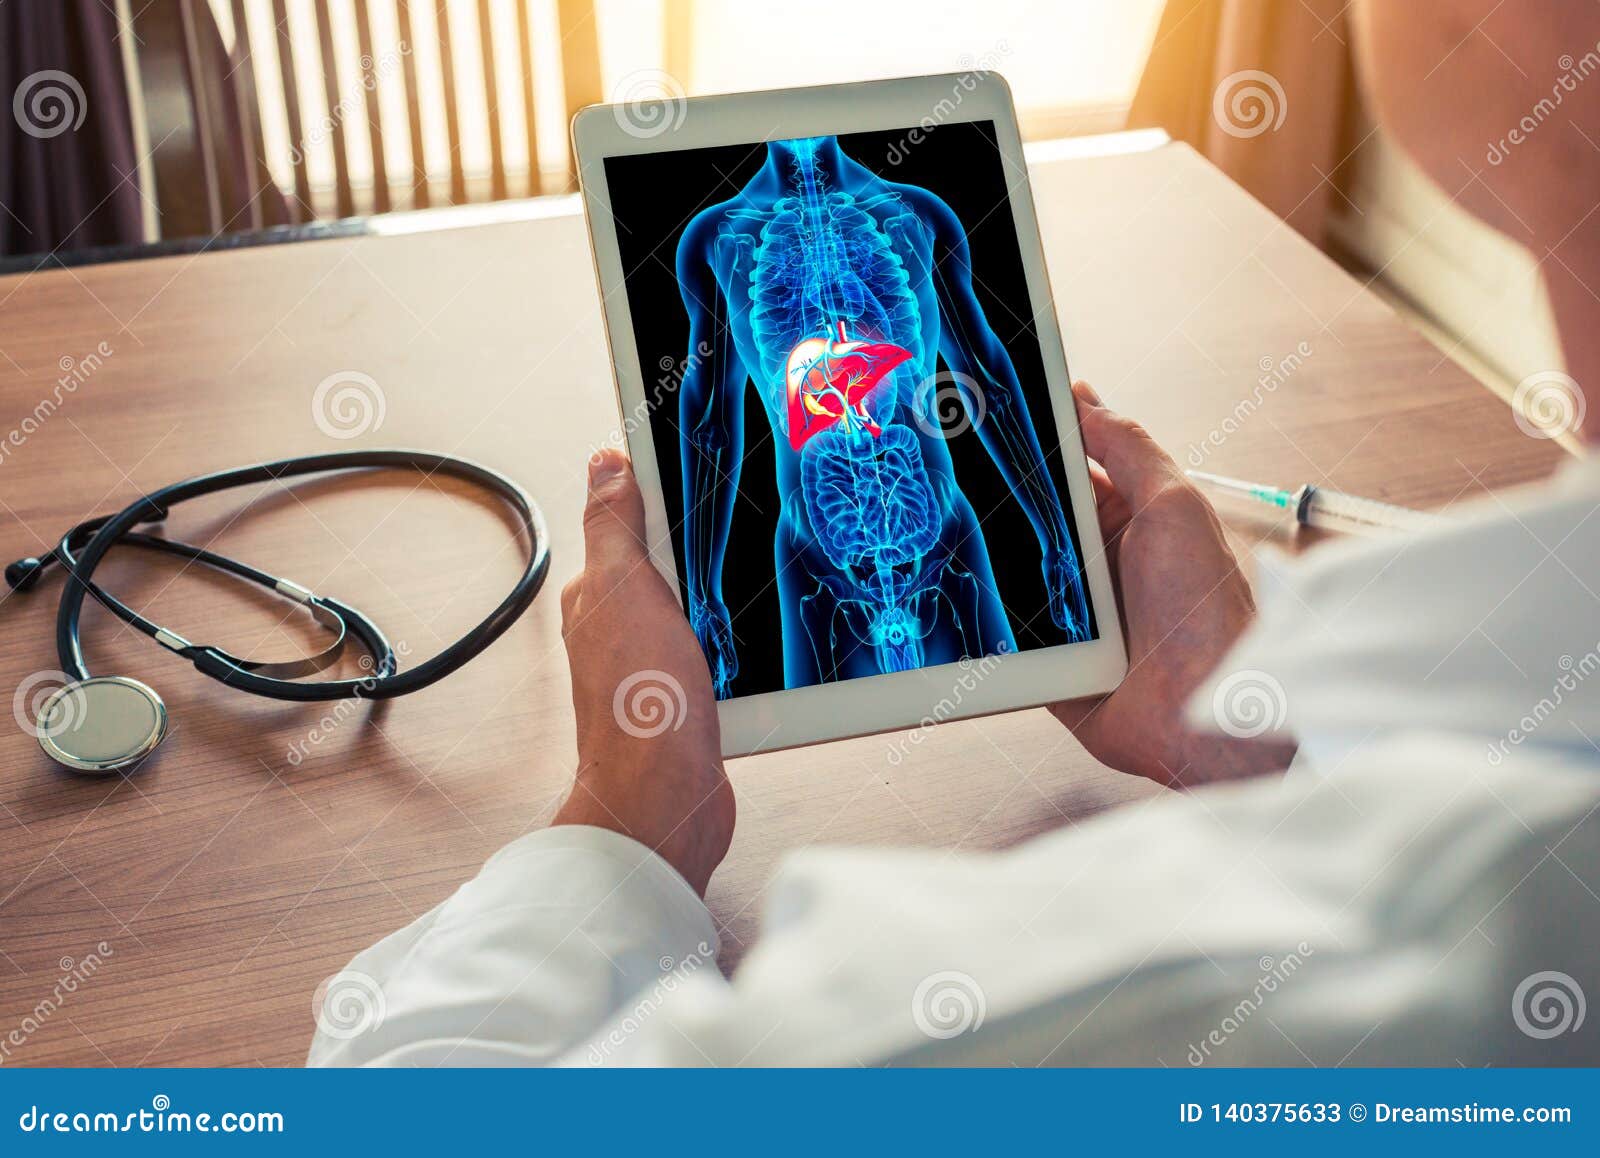 Doctor Holding A Digital Tablet With X Ray Of Body Skeleton With